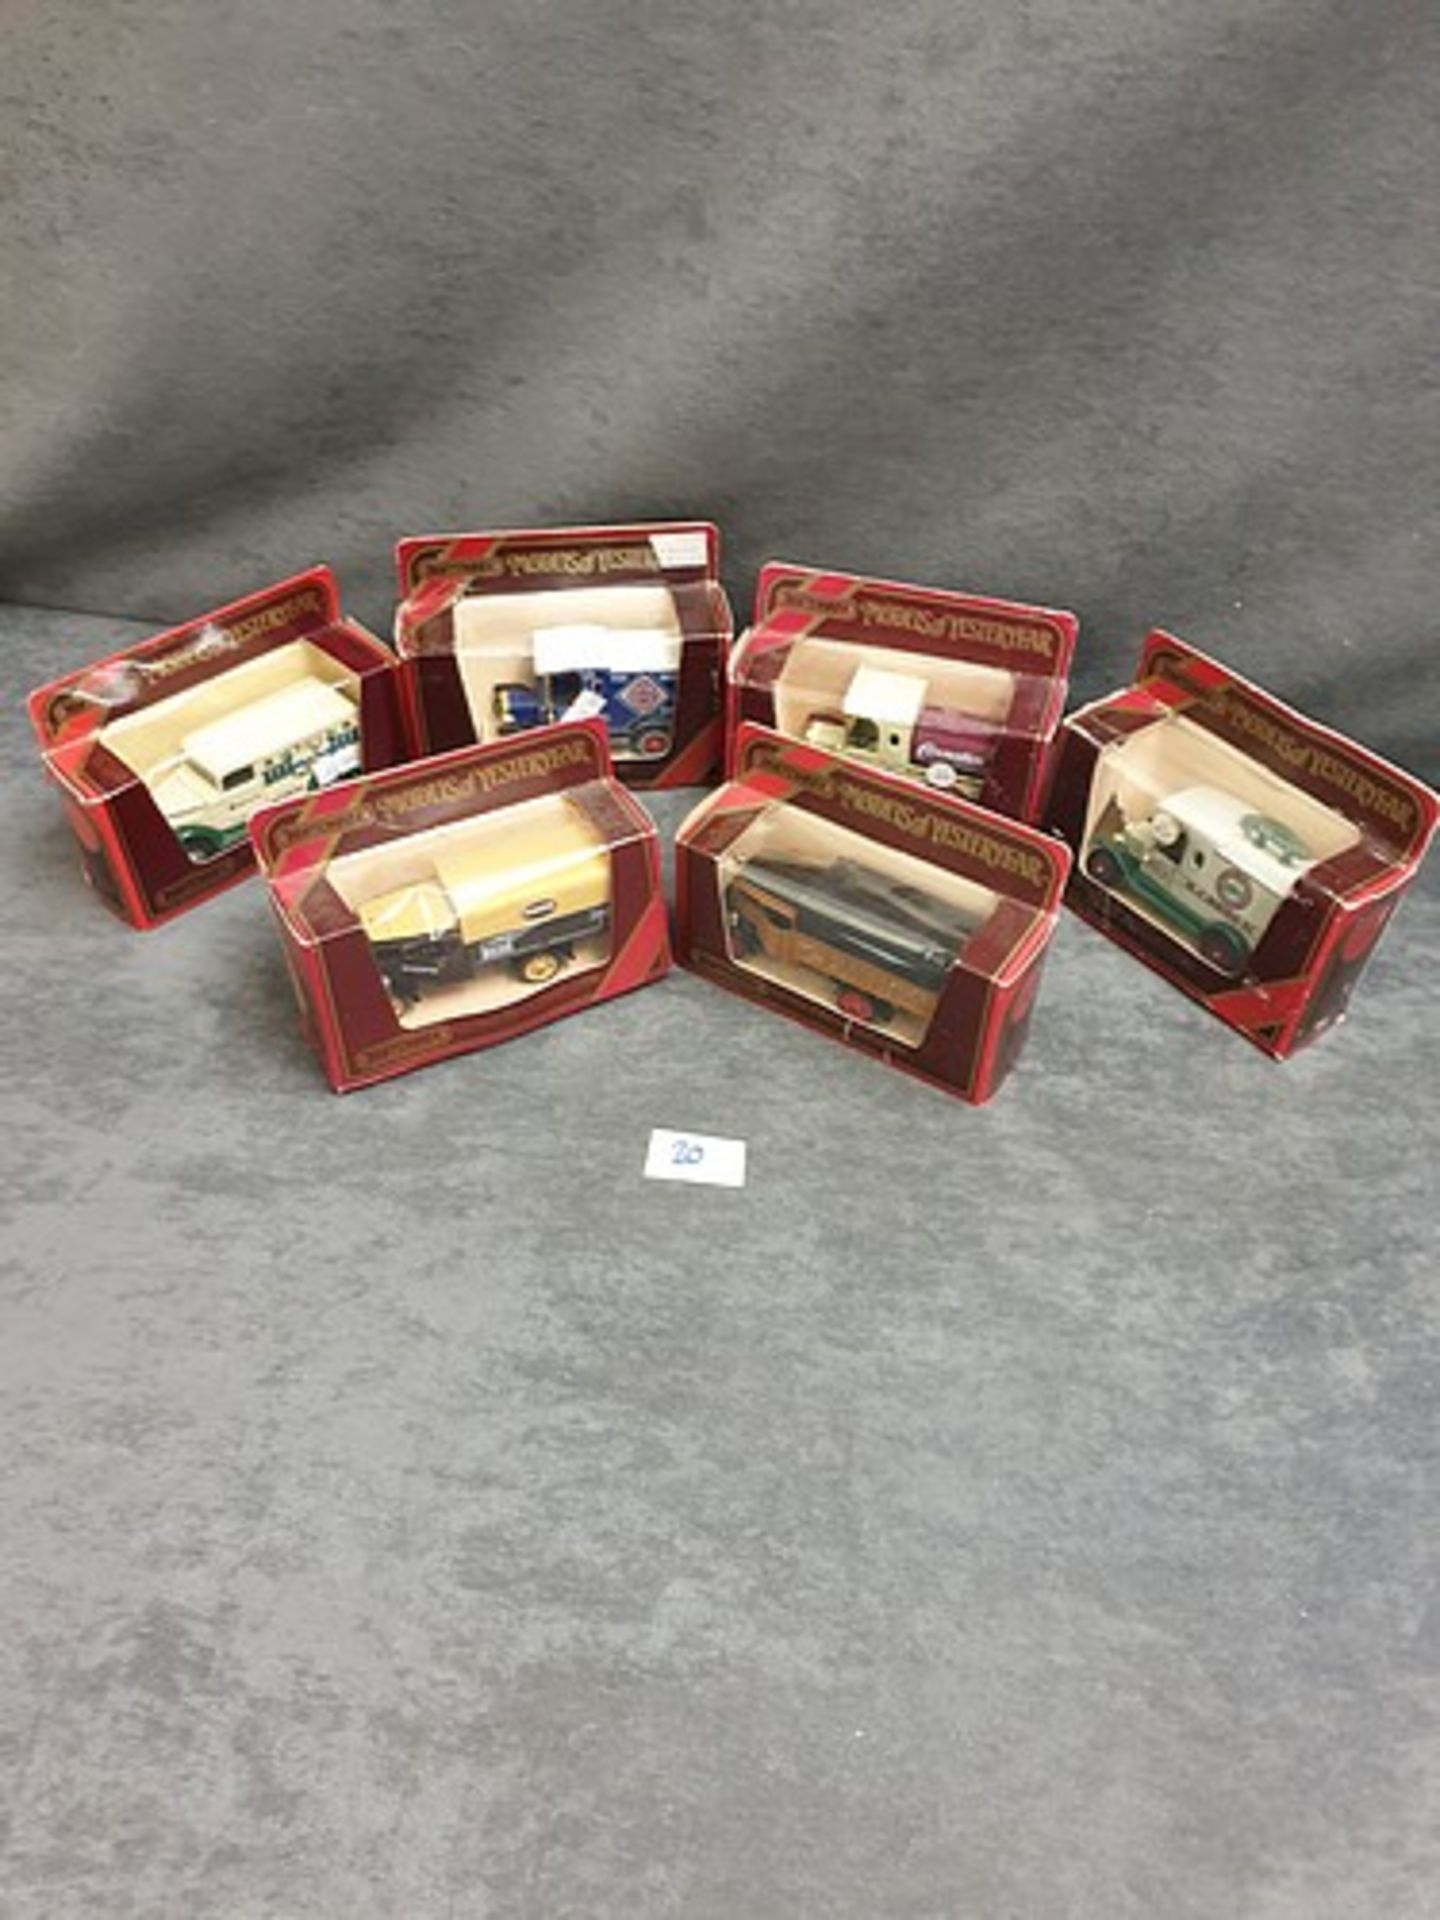 6x Models Of Yesteryear Diecast Vehicles Individually Boxed Advertising / Potato Smiths Crisps/